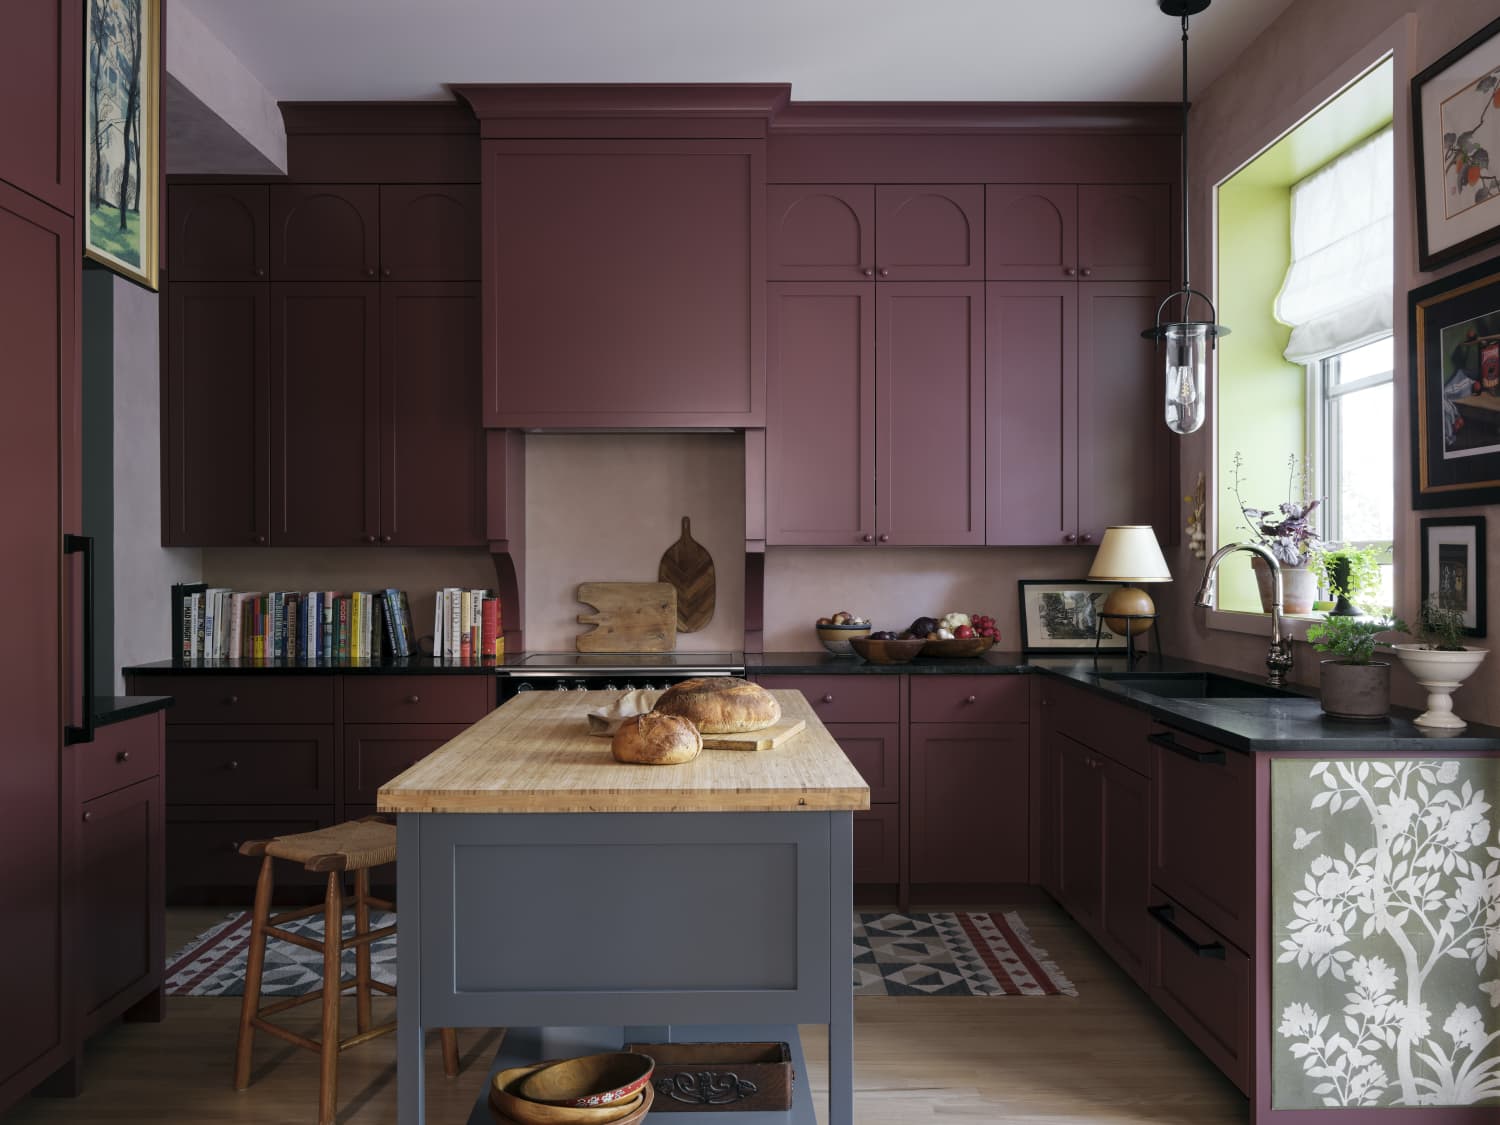 10 Small Kitchens and Storage Tricks That Inspired Us this Year   Contemporary kitchen, New kitchen cabinets, Built in microwave cabinet